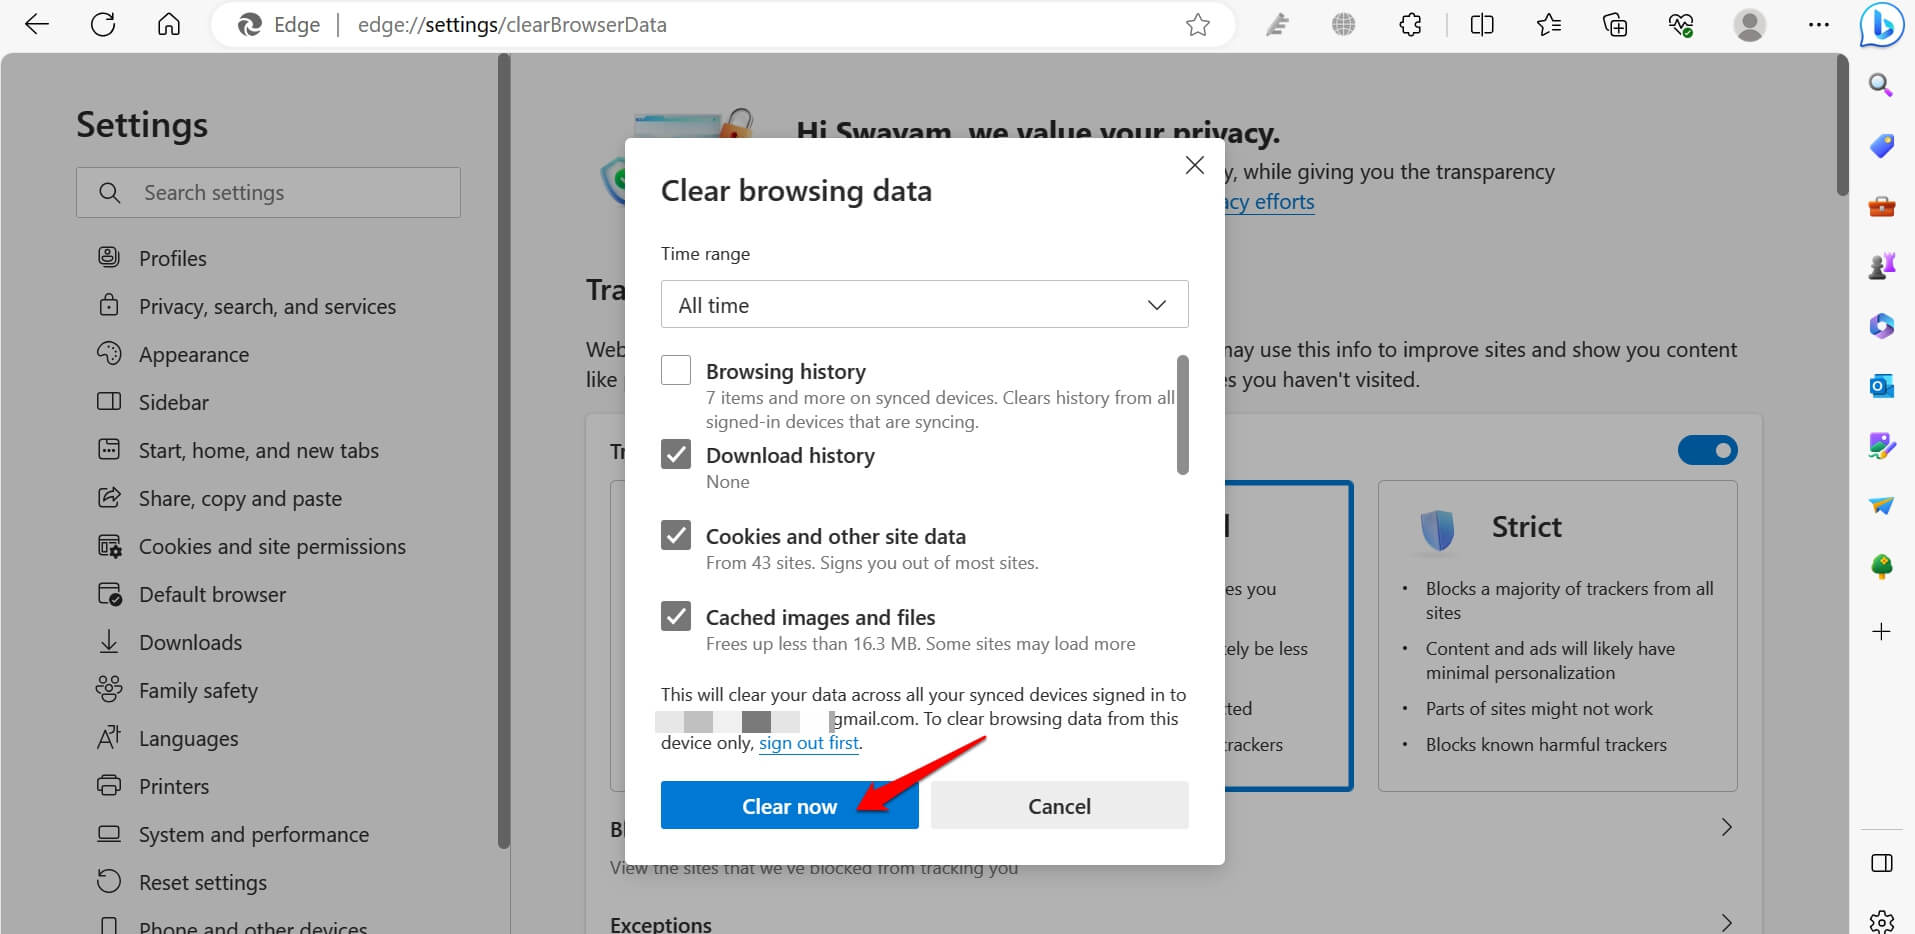 clear browsing data on Edge browser